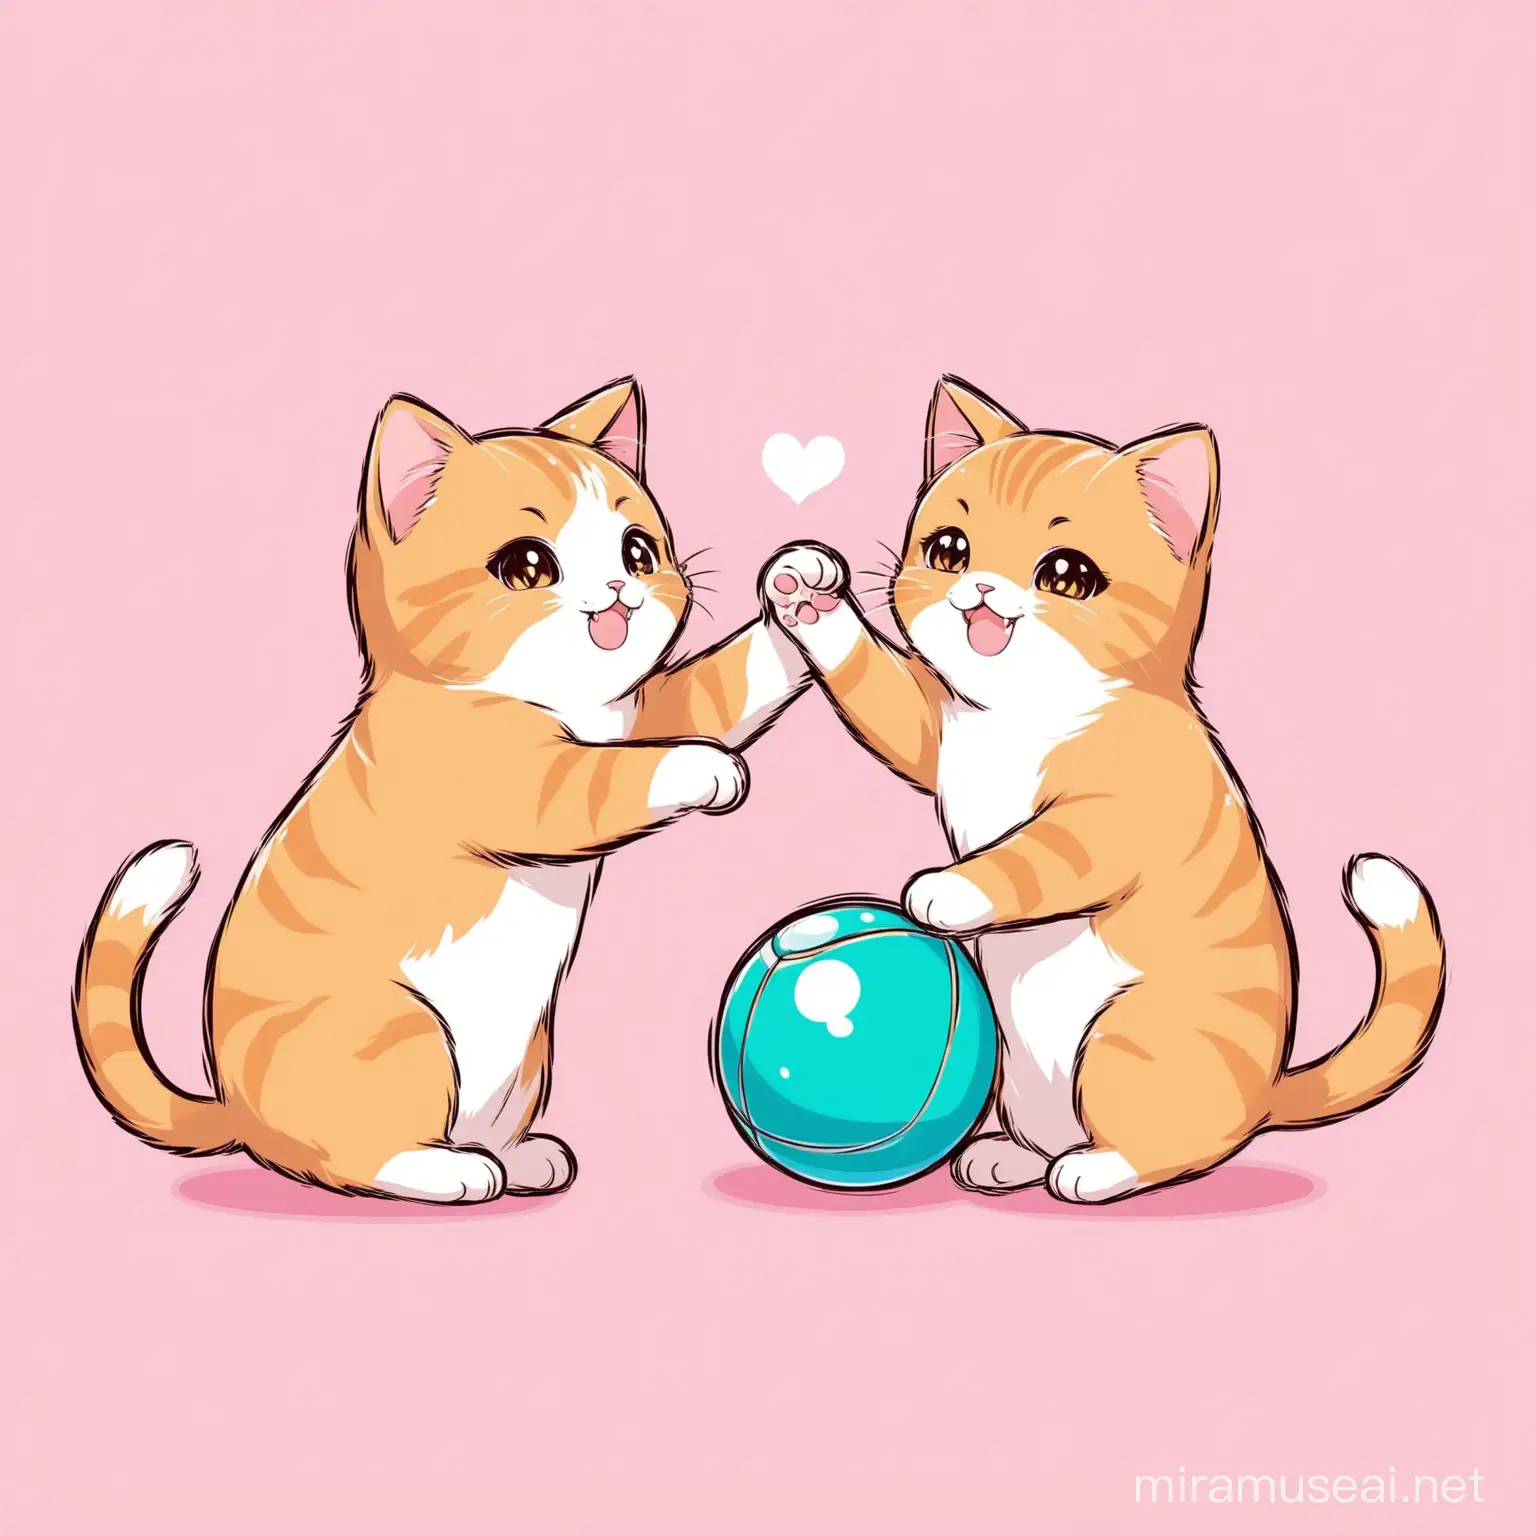 Cute cats playing with a ball 